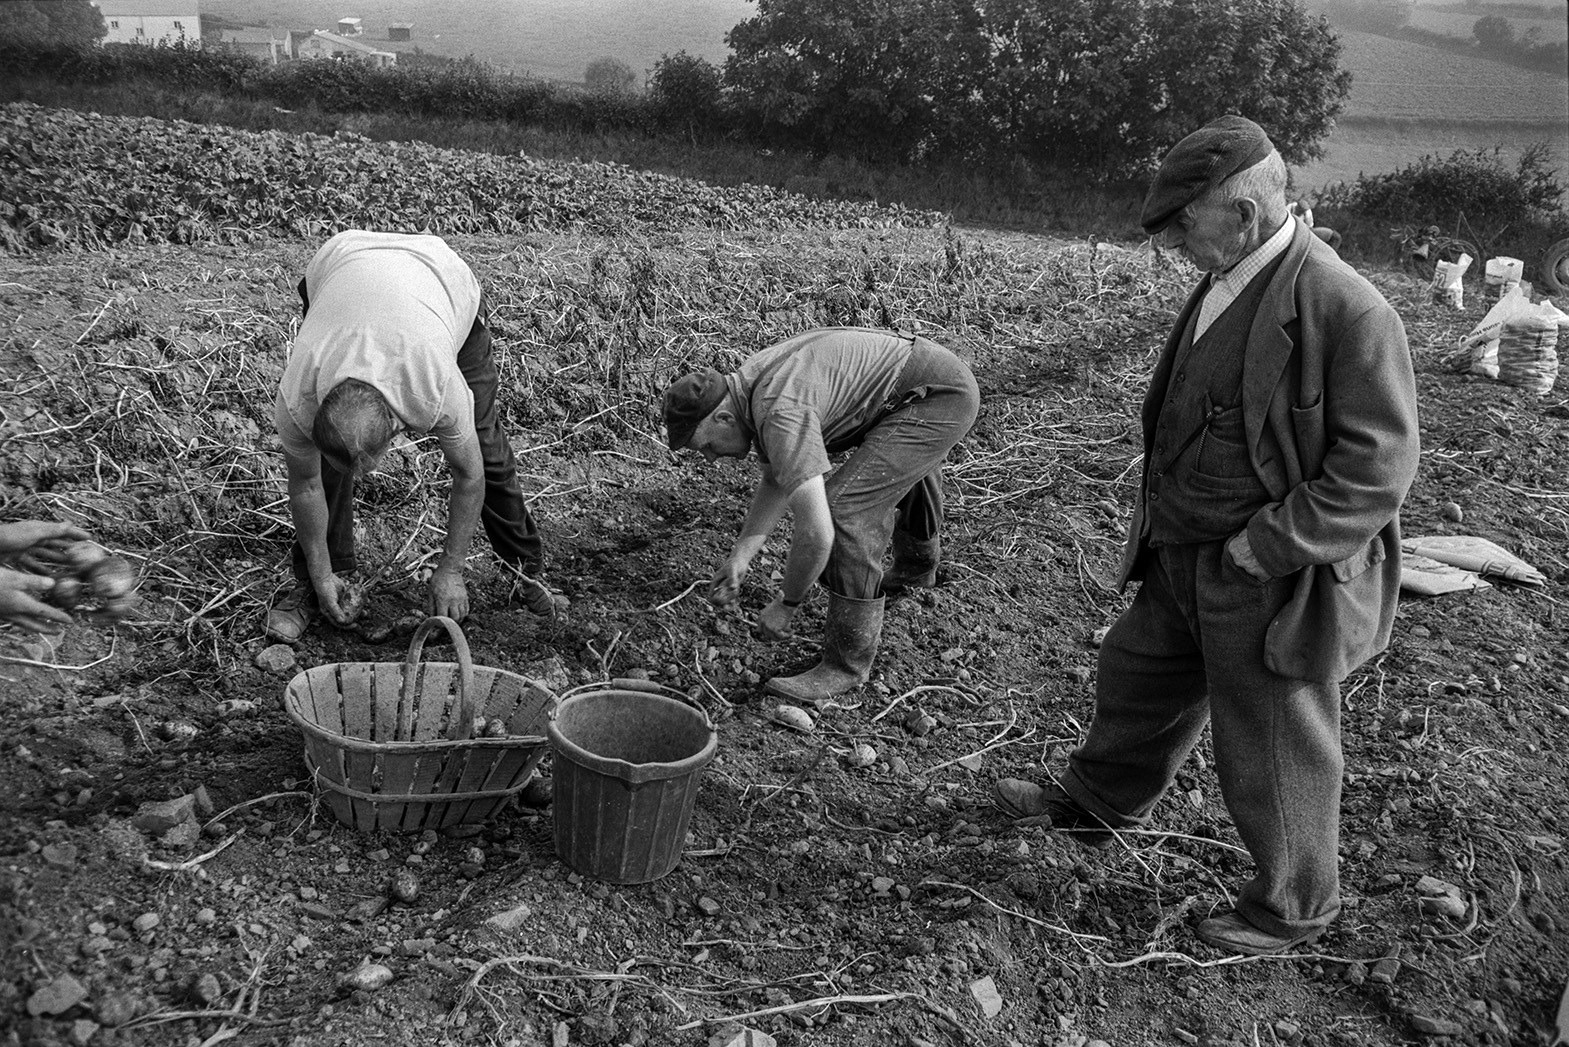 Men harvesting a potato crop and bagging up potatoes by hand, in a field at Mill Road Farm, Beaford. They are filling a trug in the foreground. The farm was also known as Jeffrys.